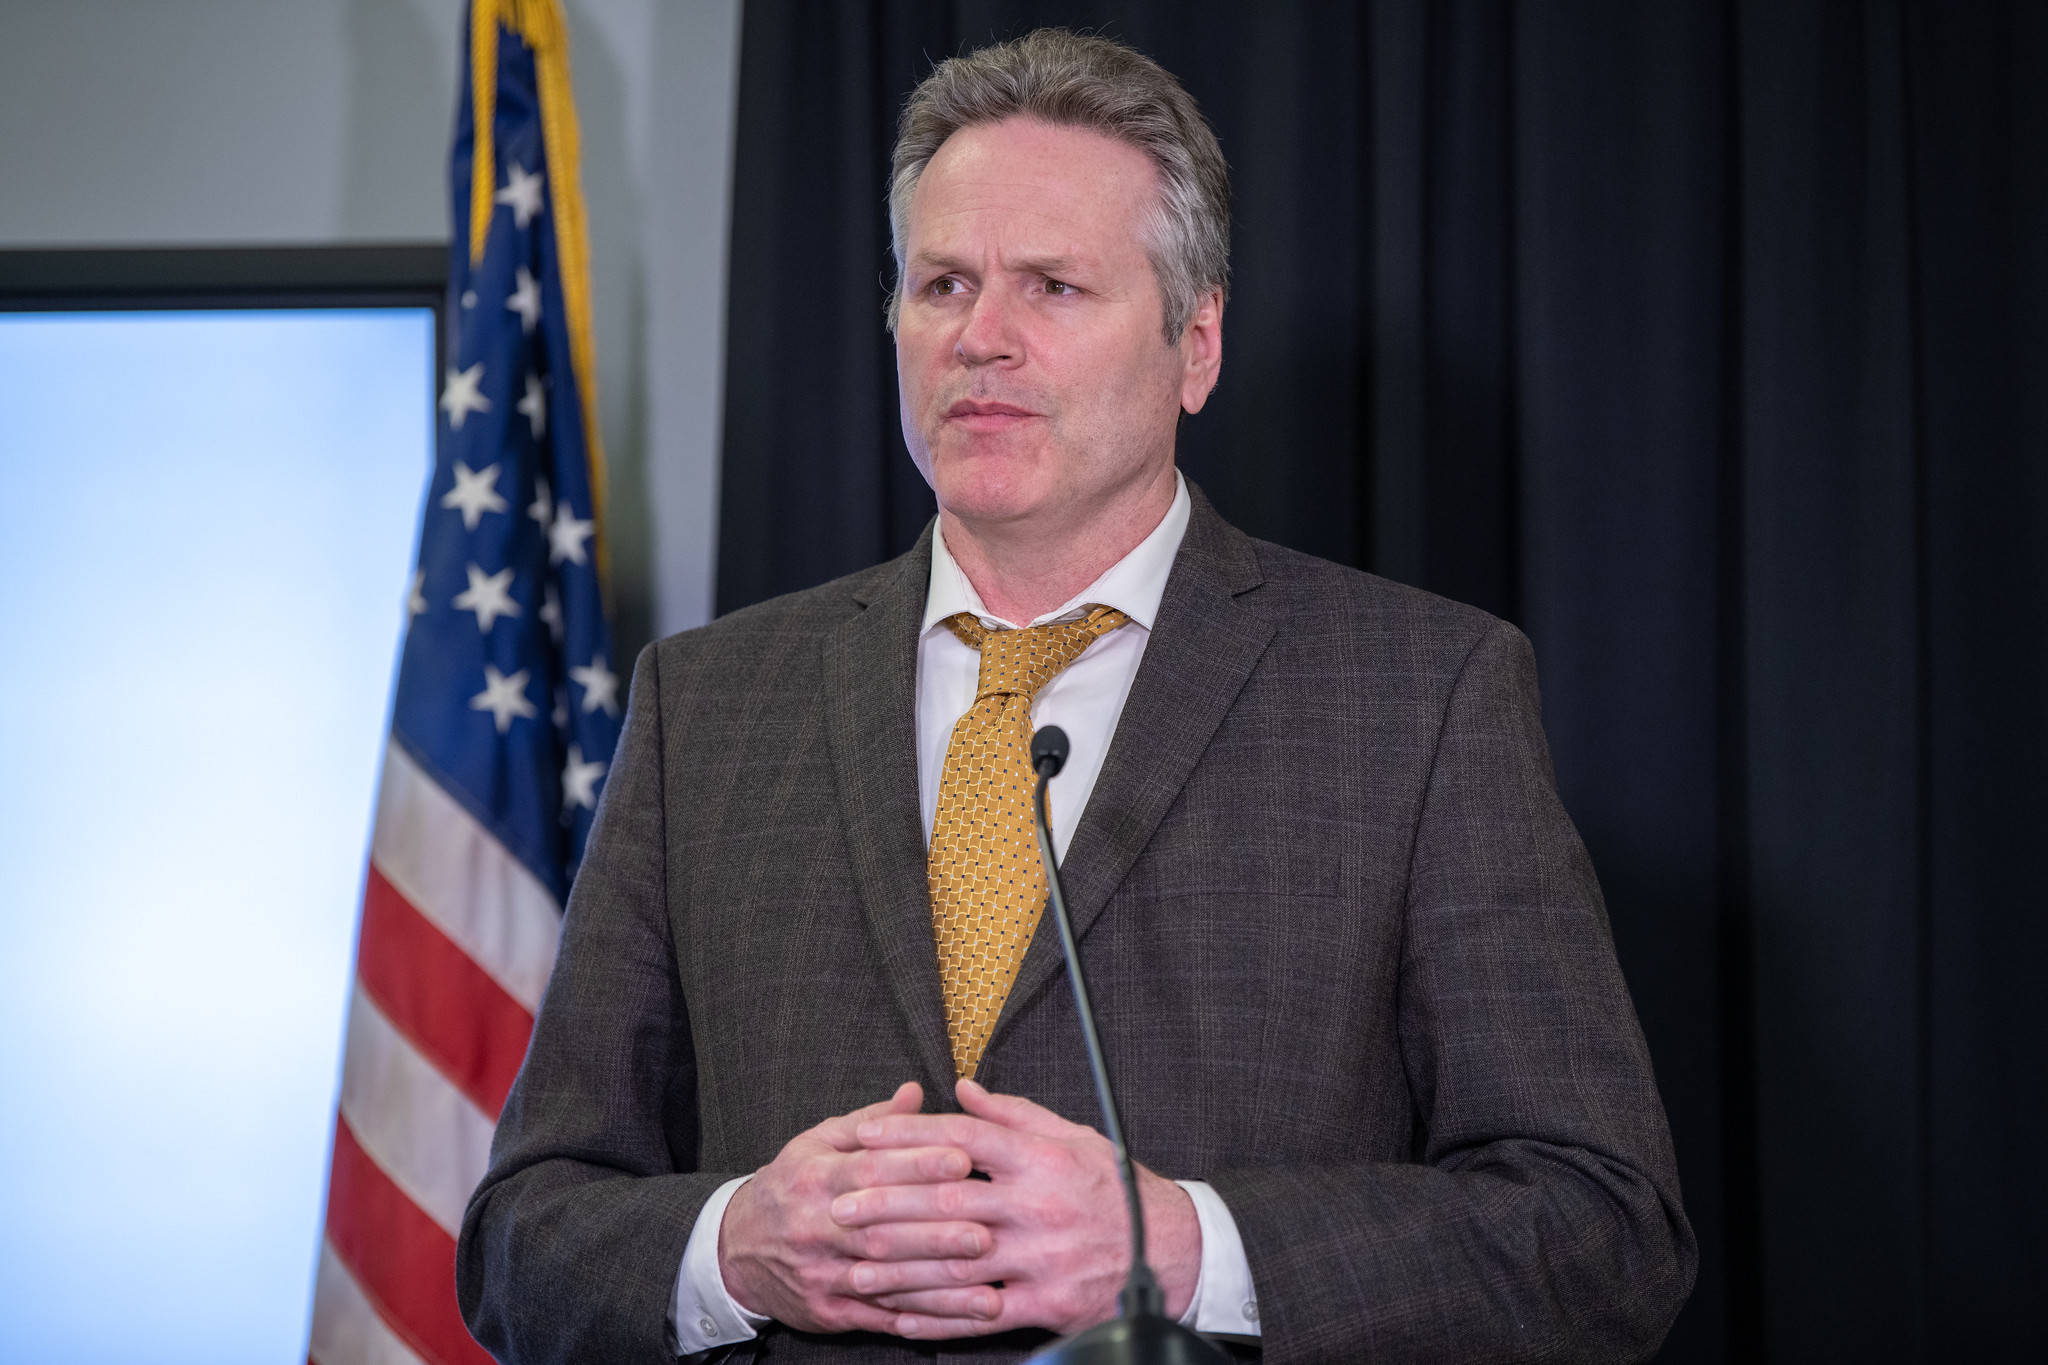 Gov. Mike Dunleavy at a press conference in Anchorage on Tuesday, April 7, 2020. (Courtesy photo | Office of Gov. Mike Dunleavy)